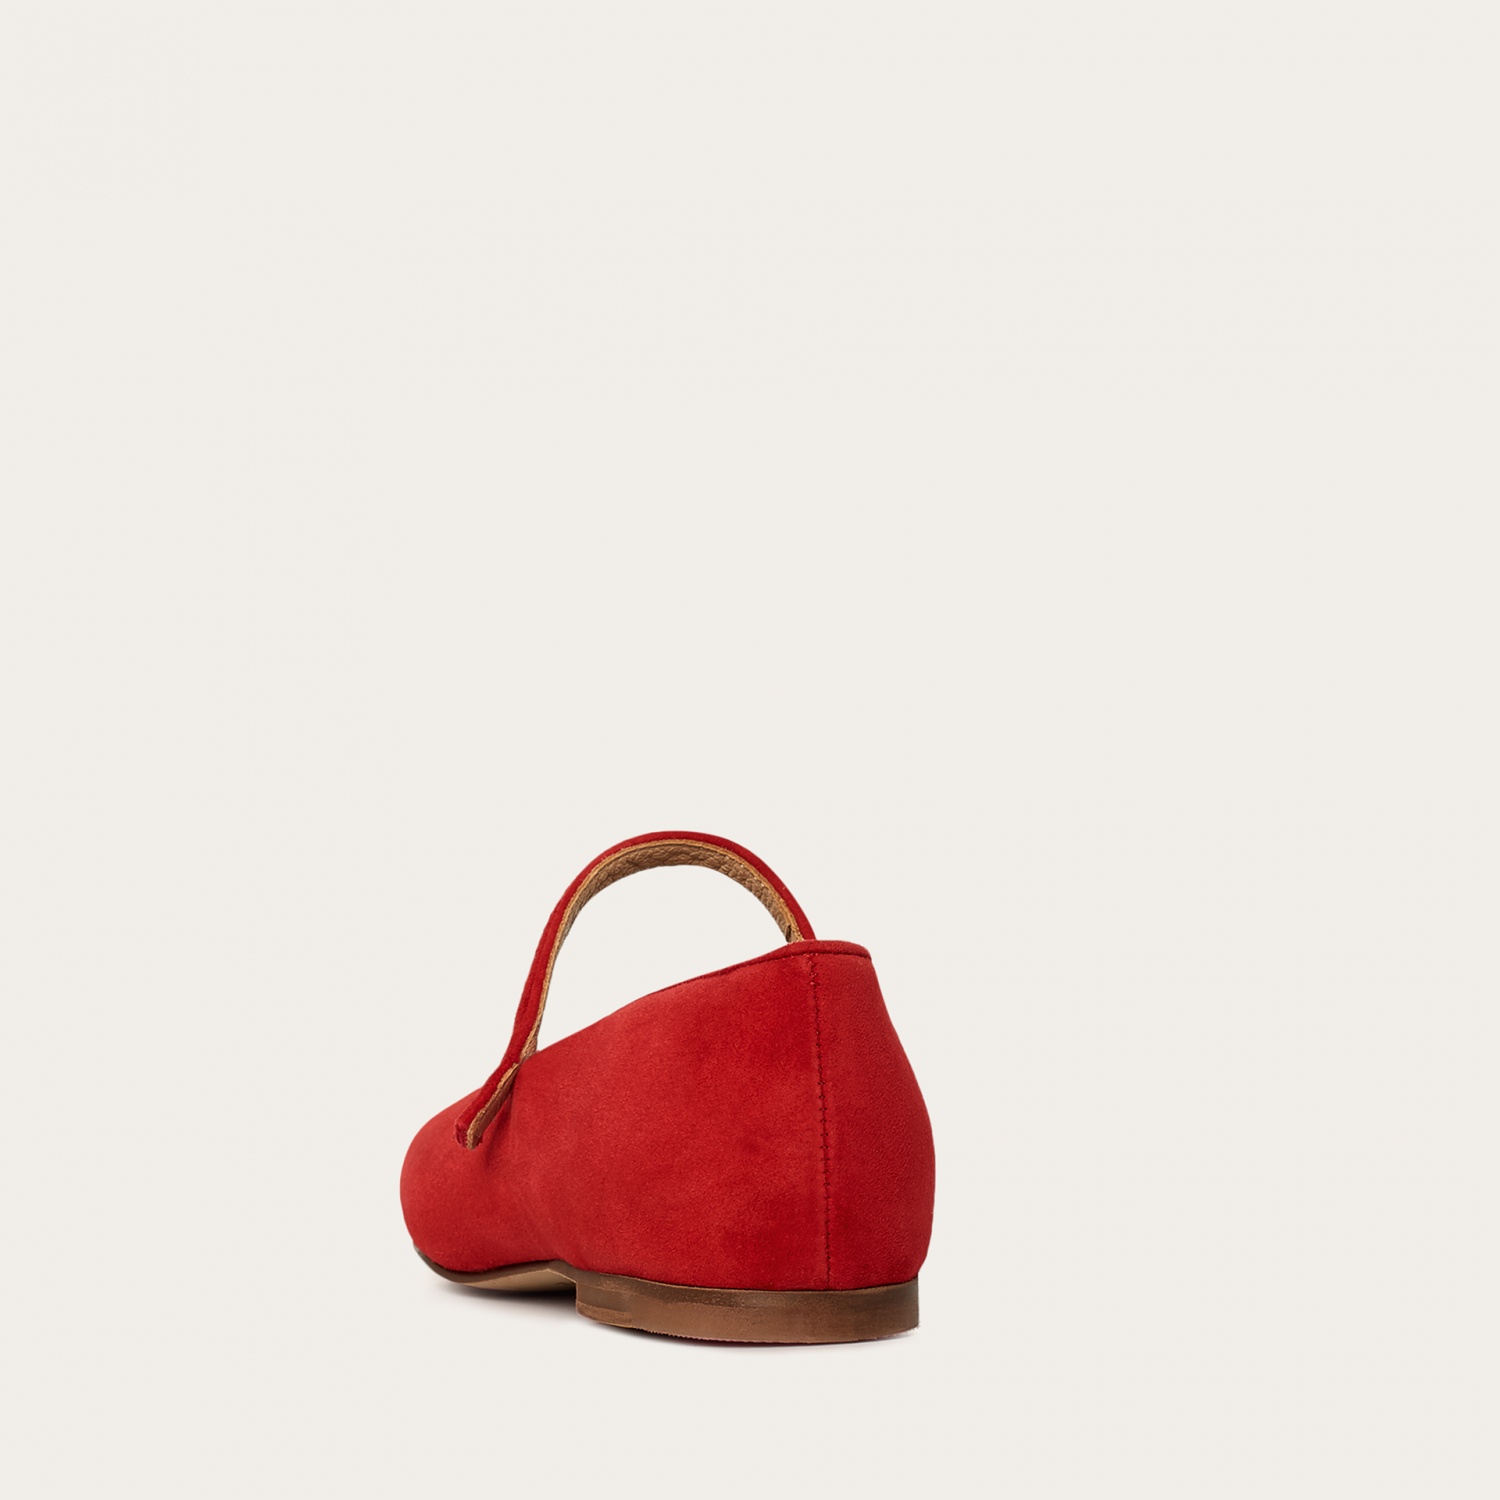  Pass Ballerina, red suede OUTLET-3 